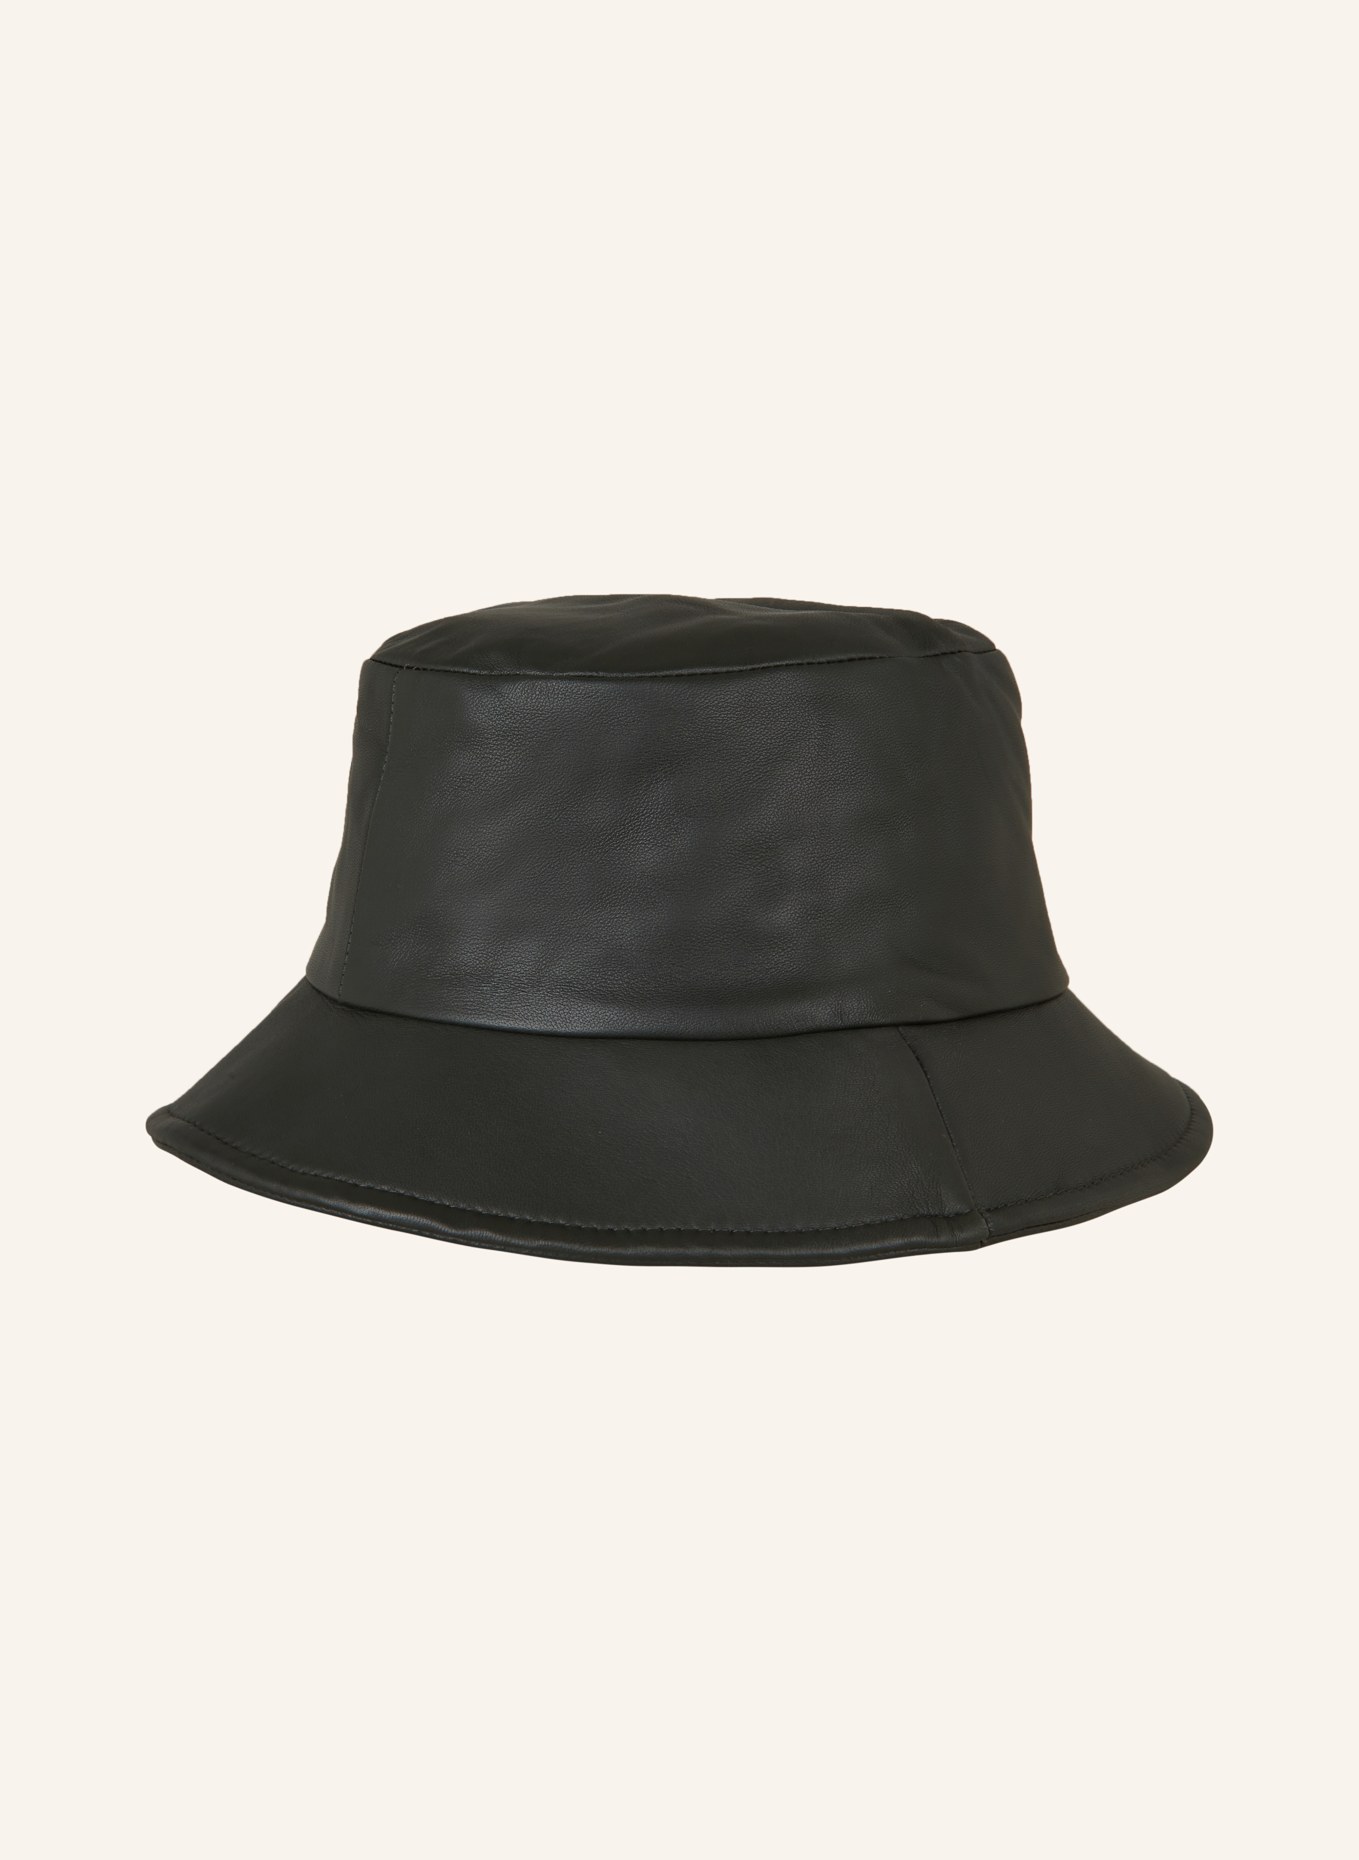 AMI PARIS Bucket hat made of leather, Color: OLIVE (Image 2)